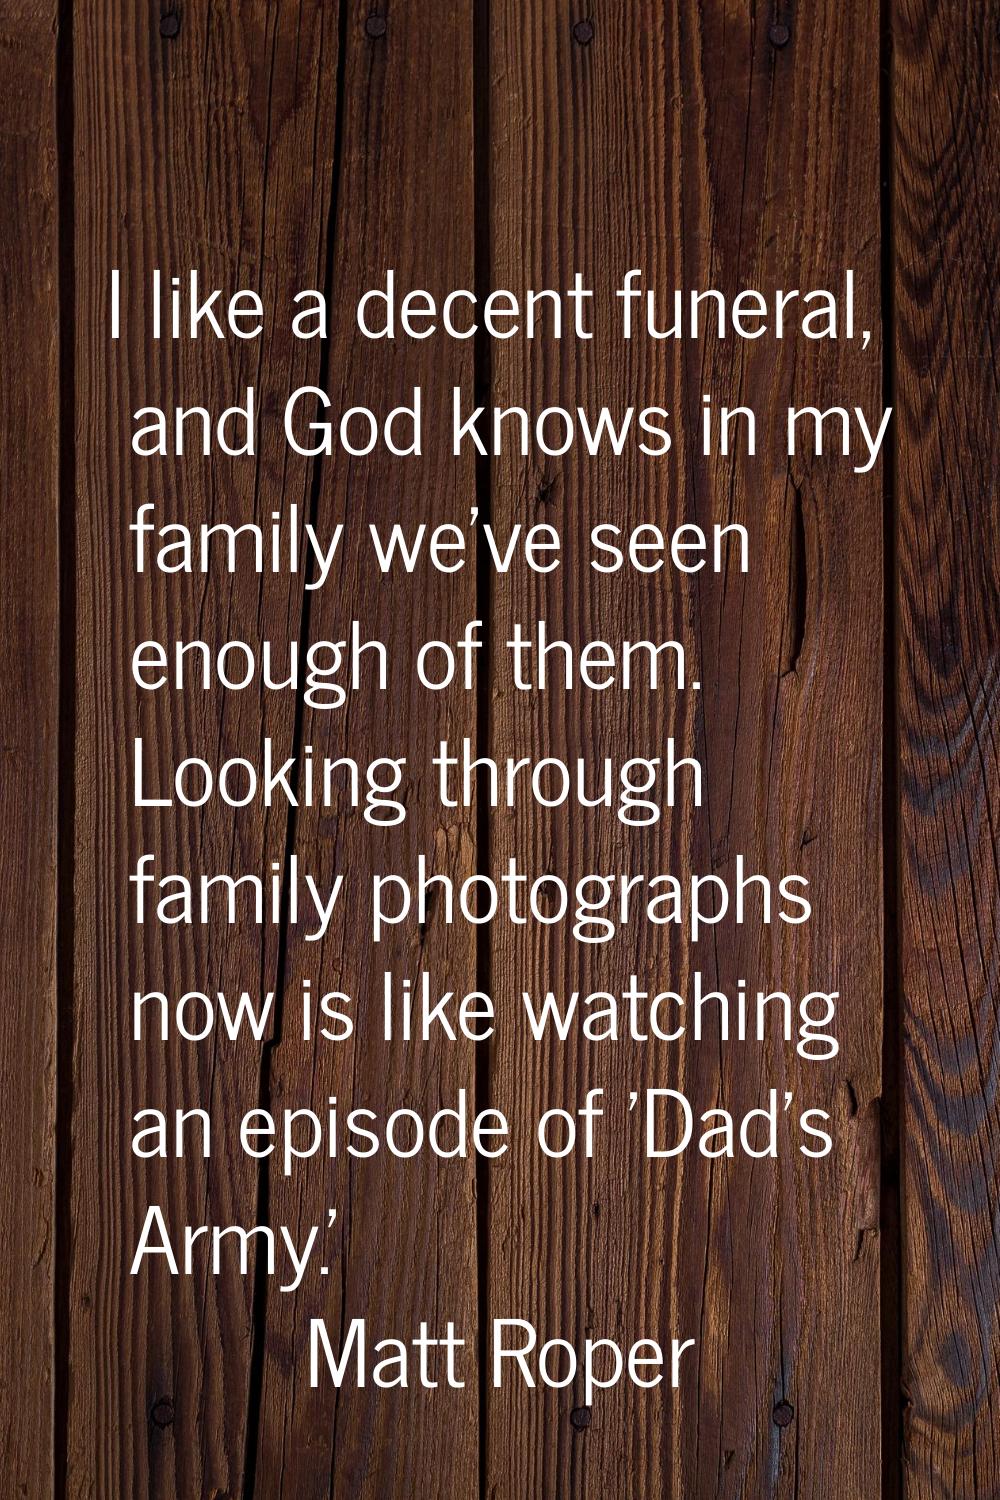 I like a decent funeral, and God knows in my family we've seen enough of them. Looking through fami